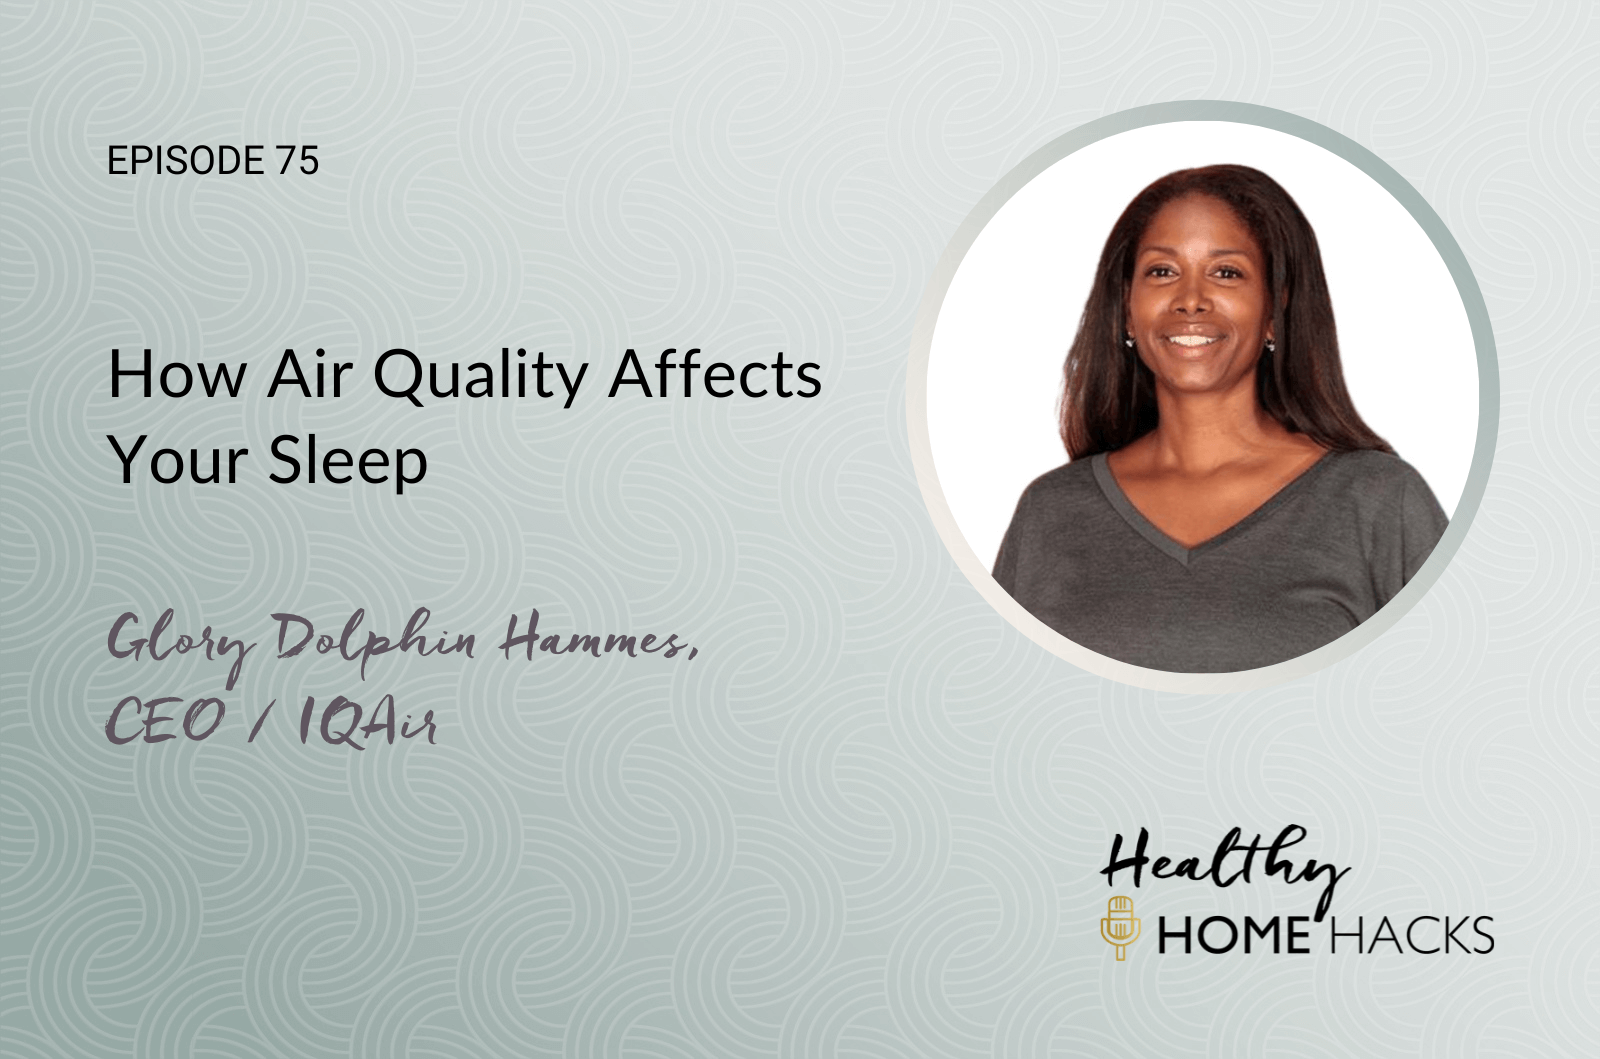 How Air Quality Affects Your Sleep